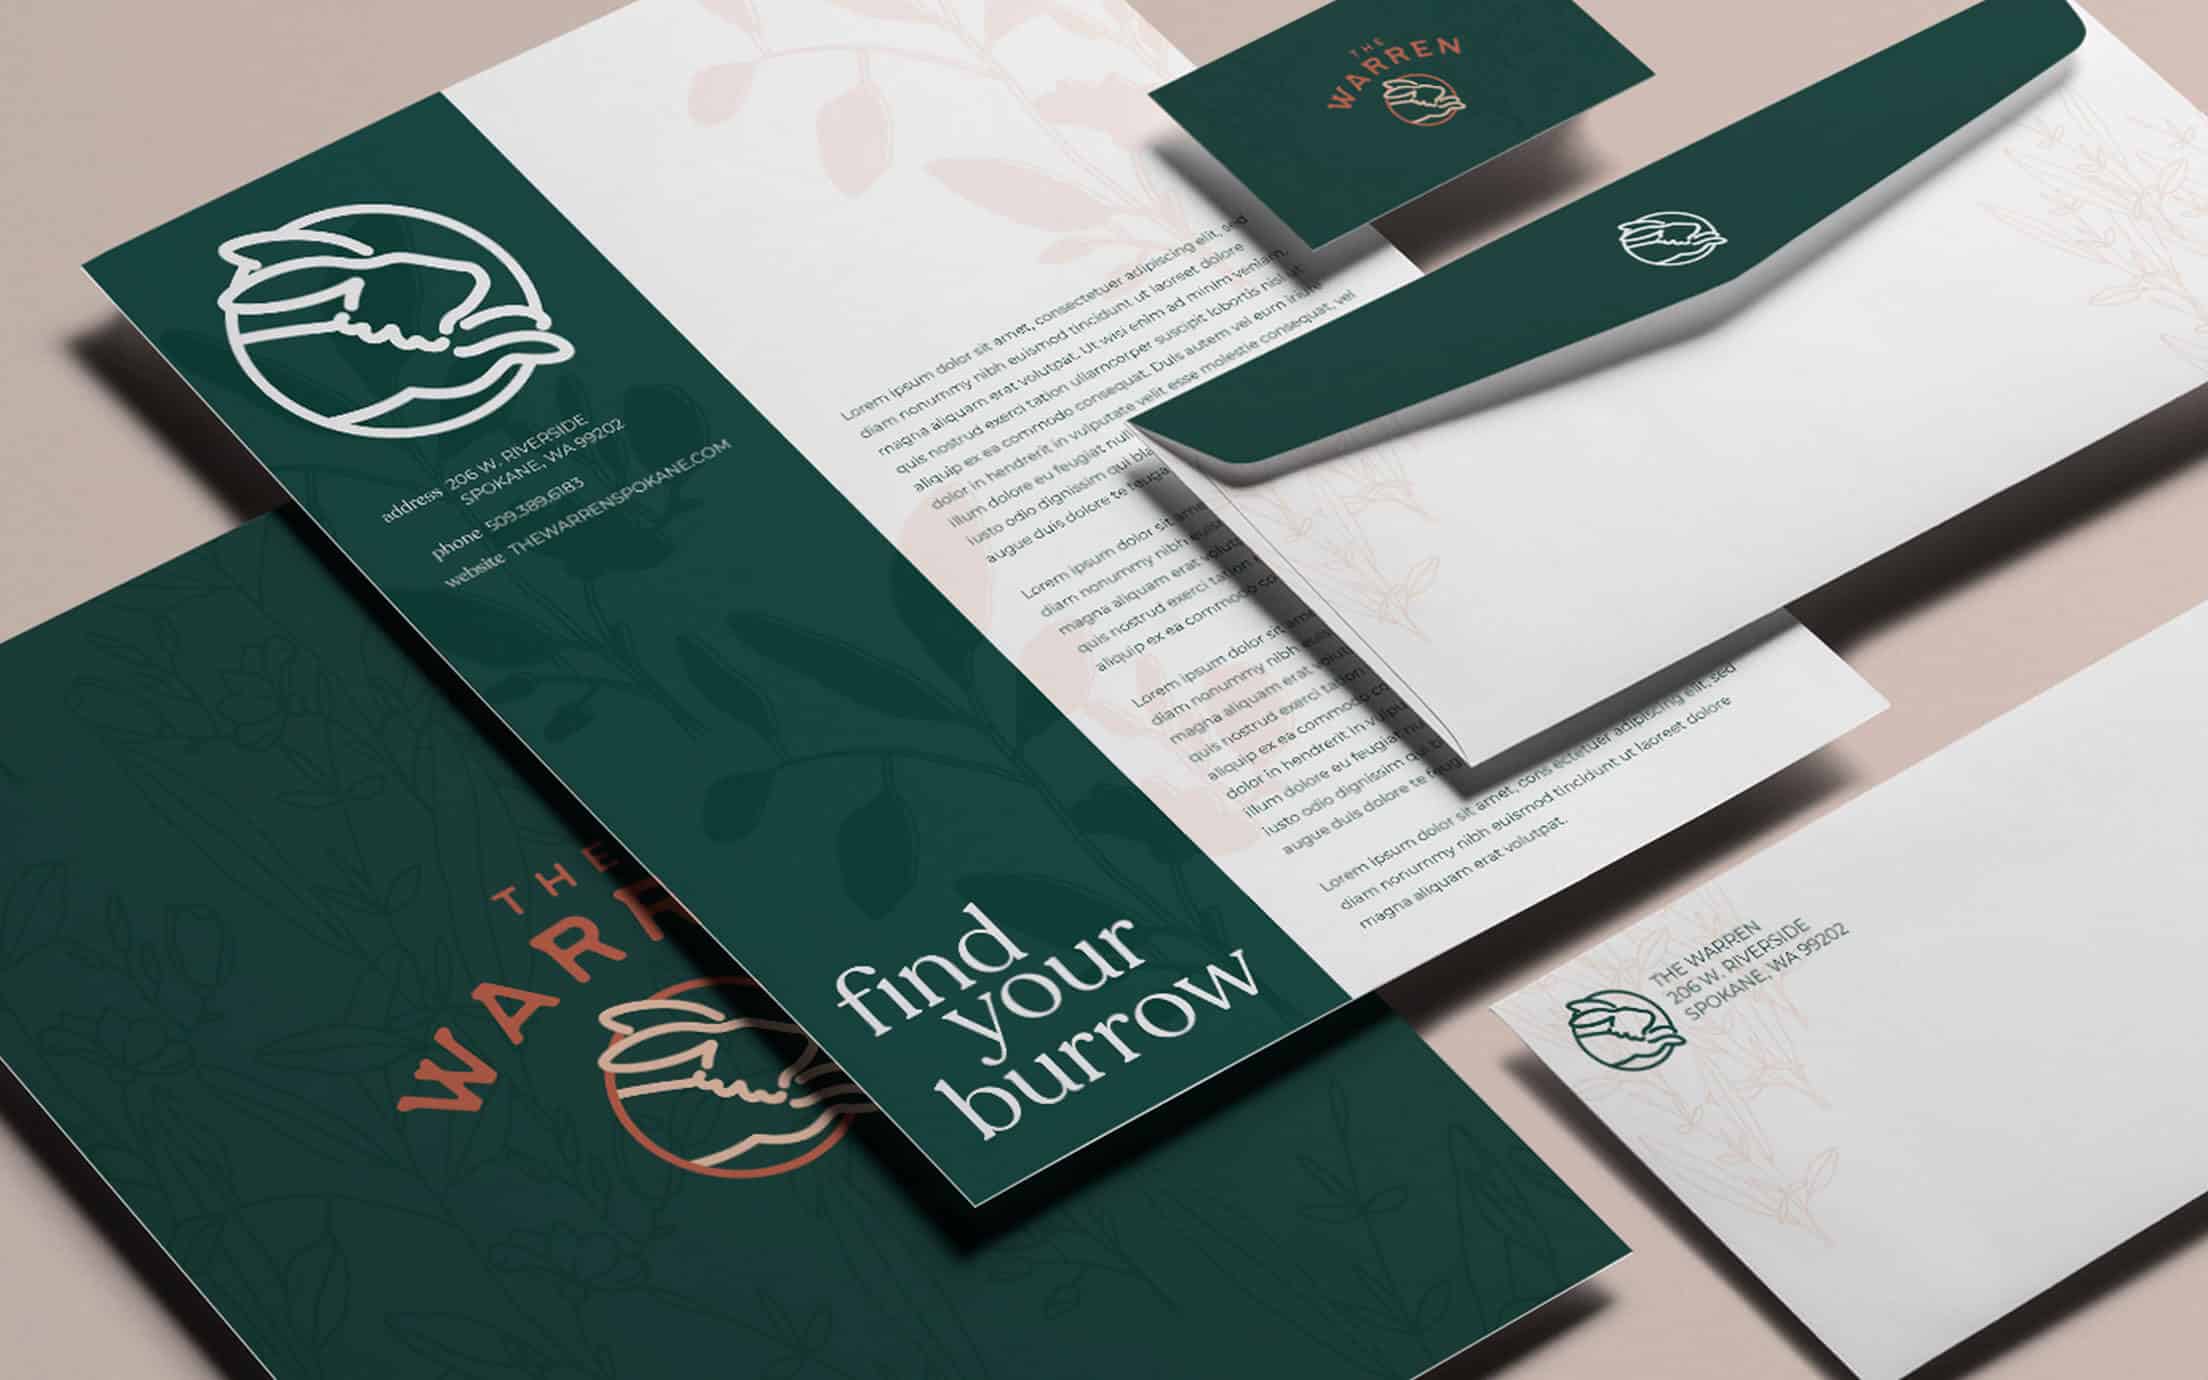 The Warren Stationary and Letterhead Mockups